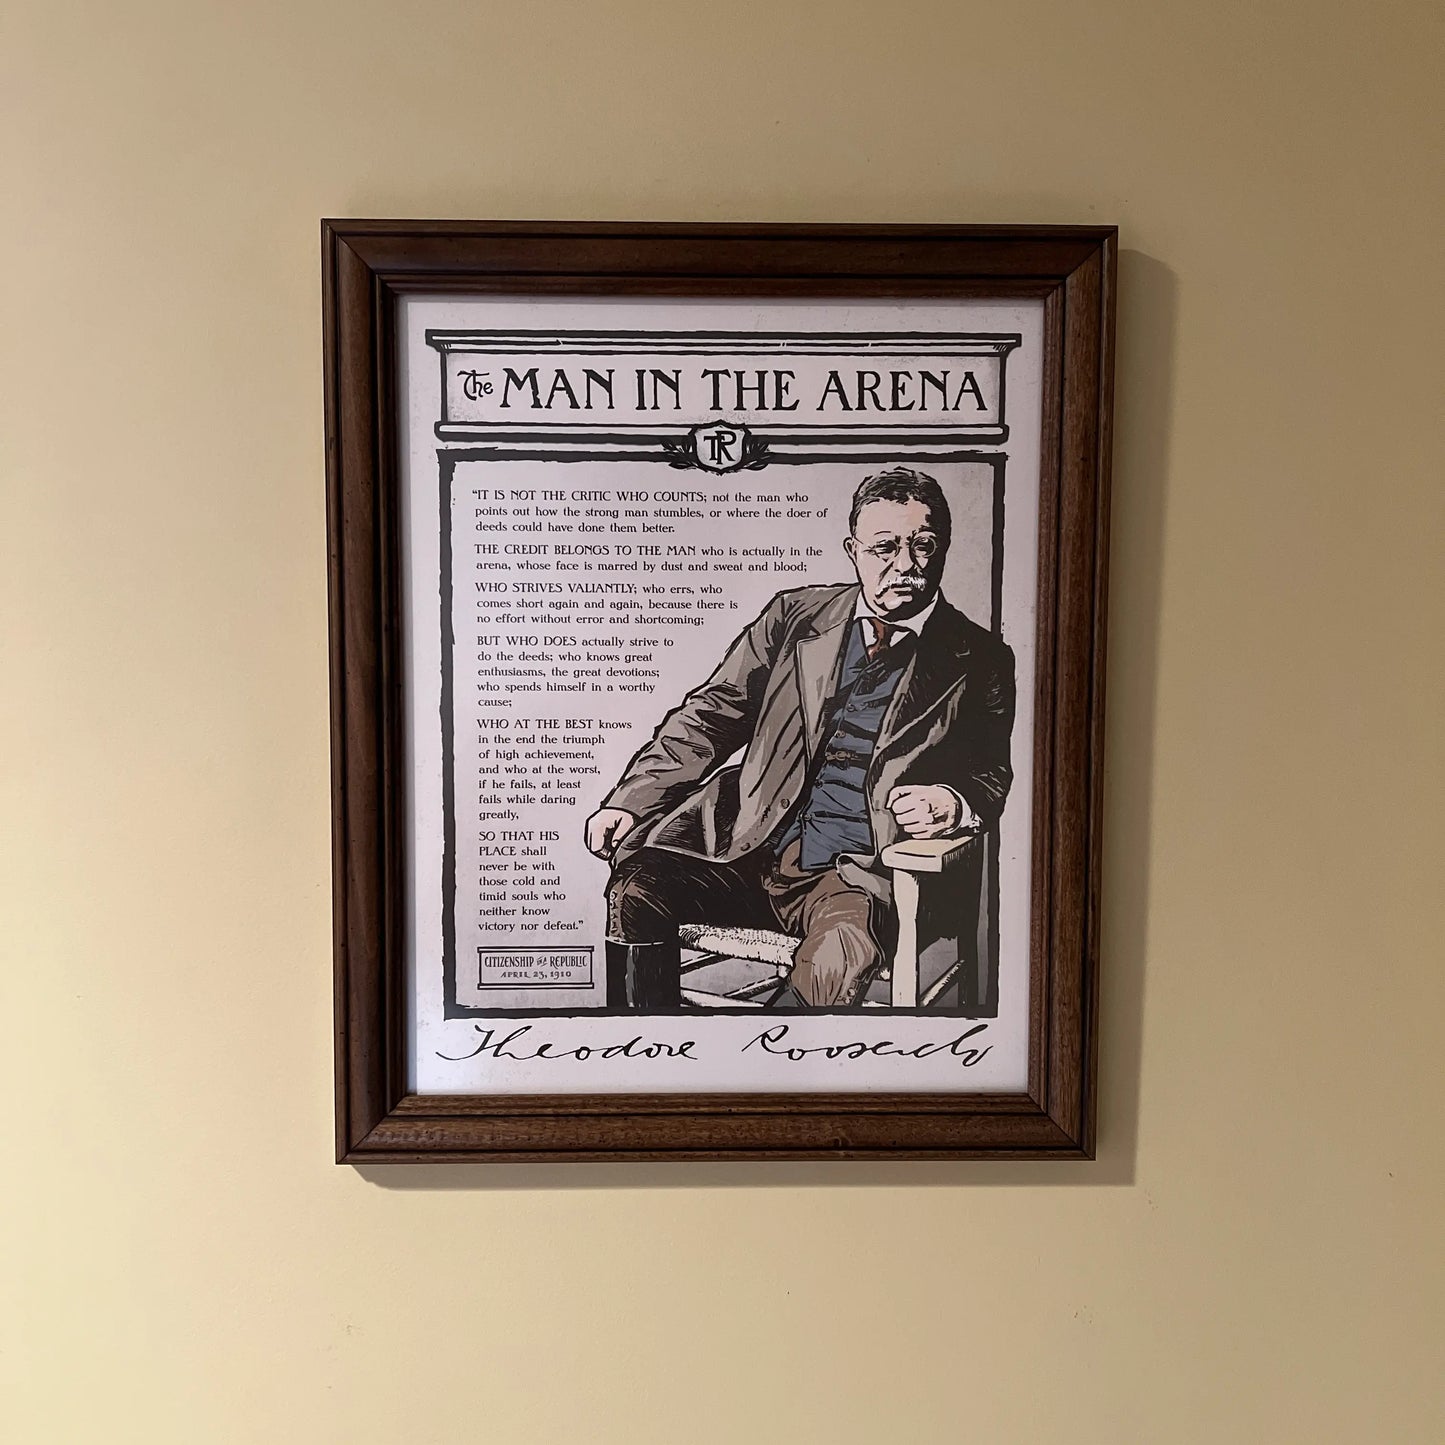 The Man in the Arena — Teddy Roosevelt original framed print made in America